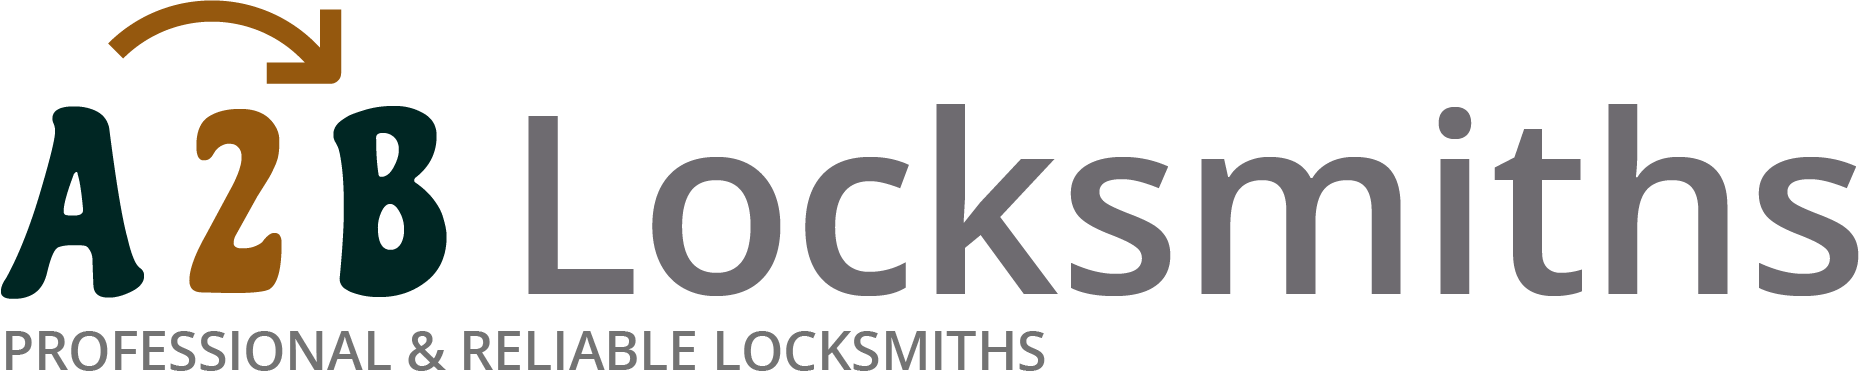 If you are locked out of house in Chalfont St Peter, our 24/7 local emergency locksmith services can help you.